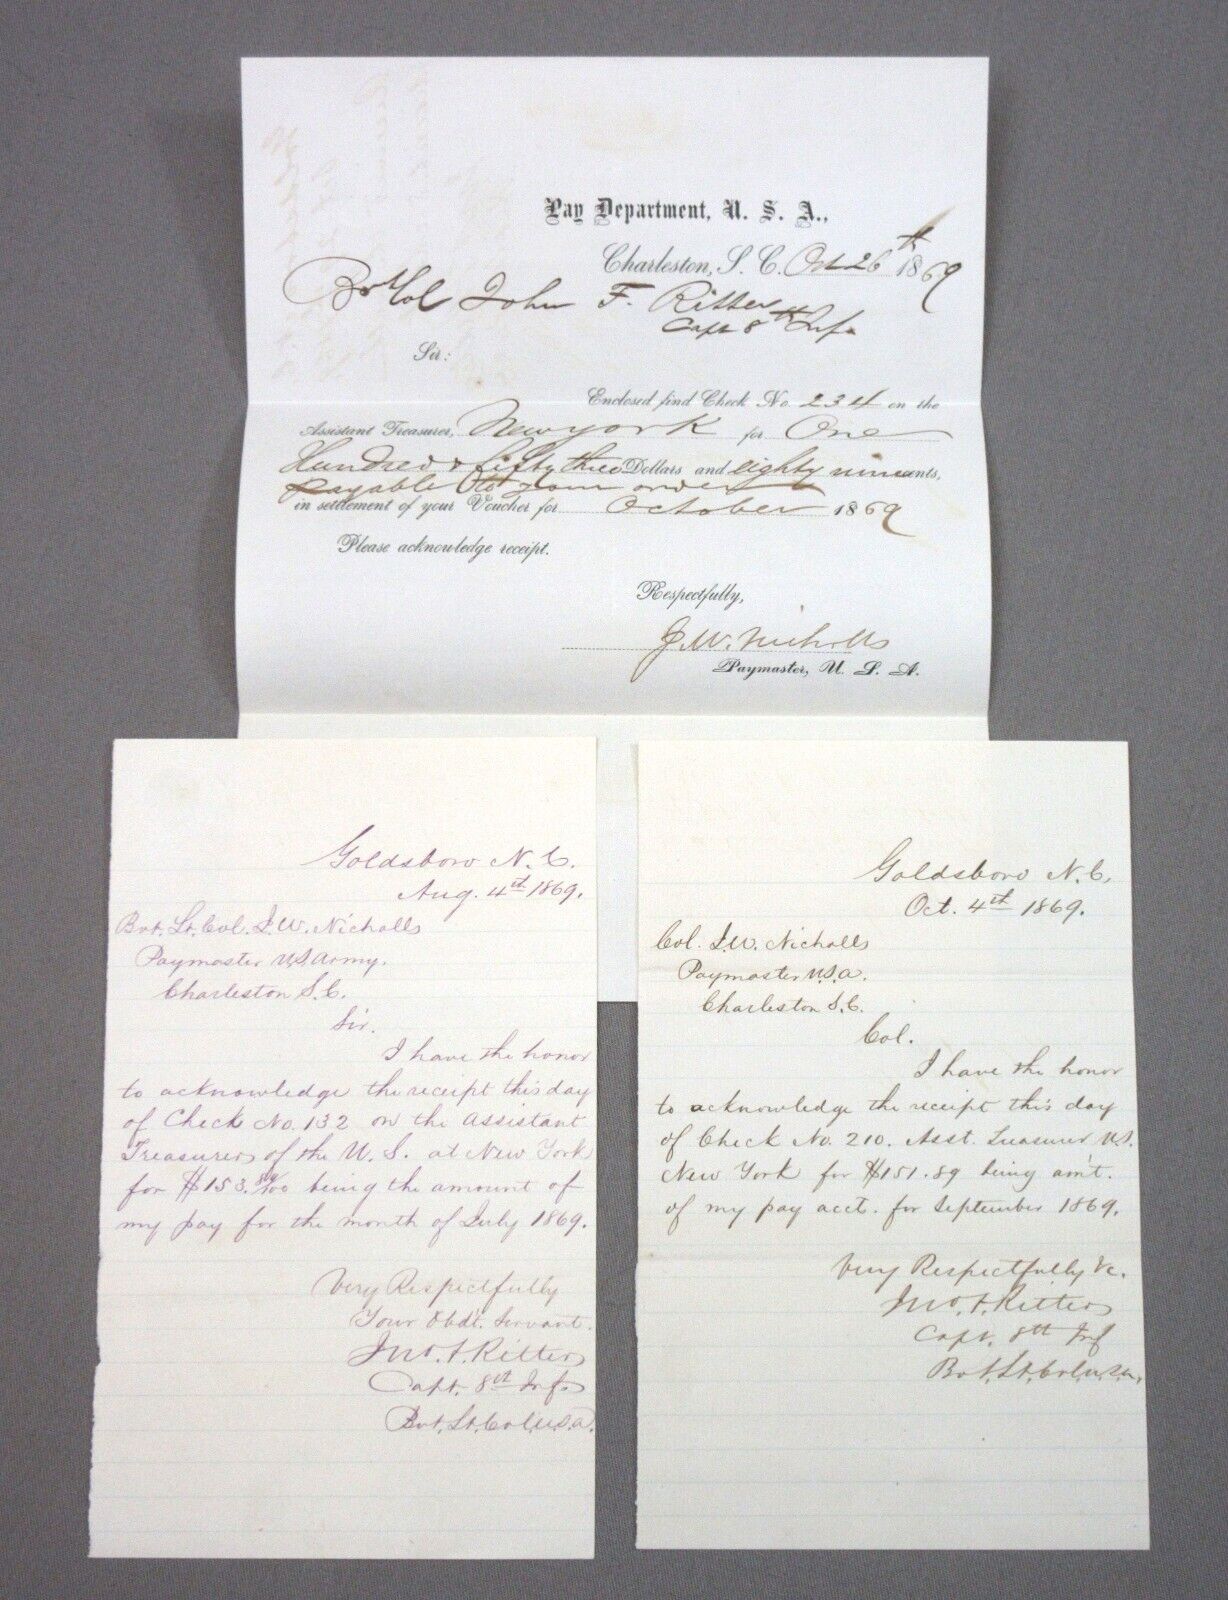 Group of 3 Documents Concerning Pay for Capt. John F. Ritter, 8th U.S. INF.